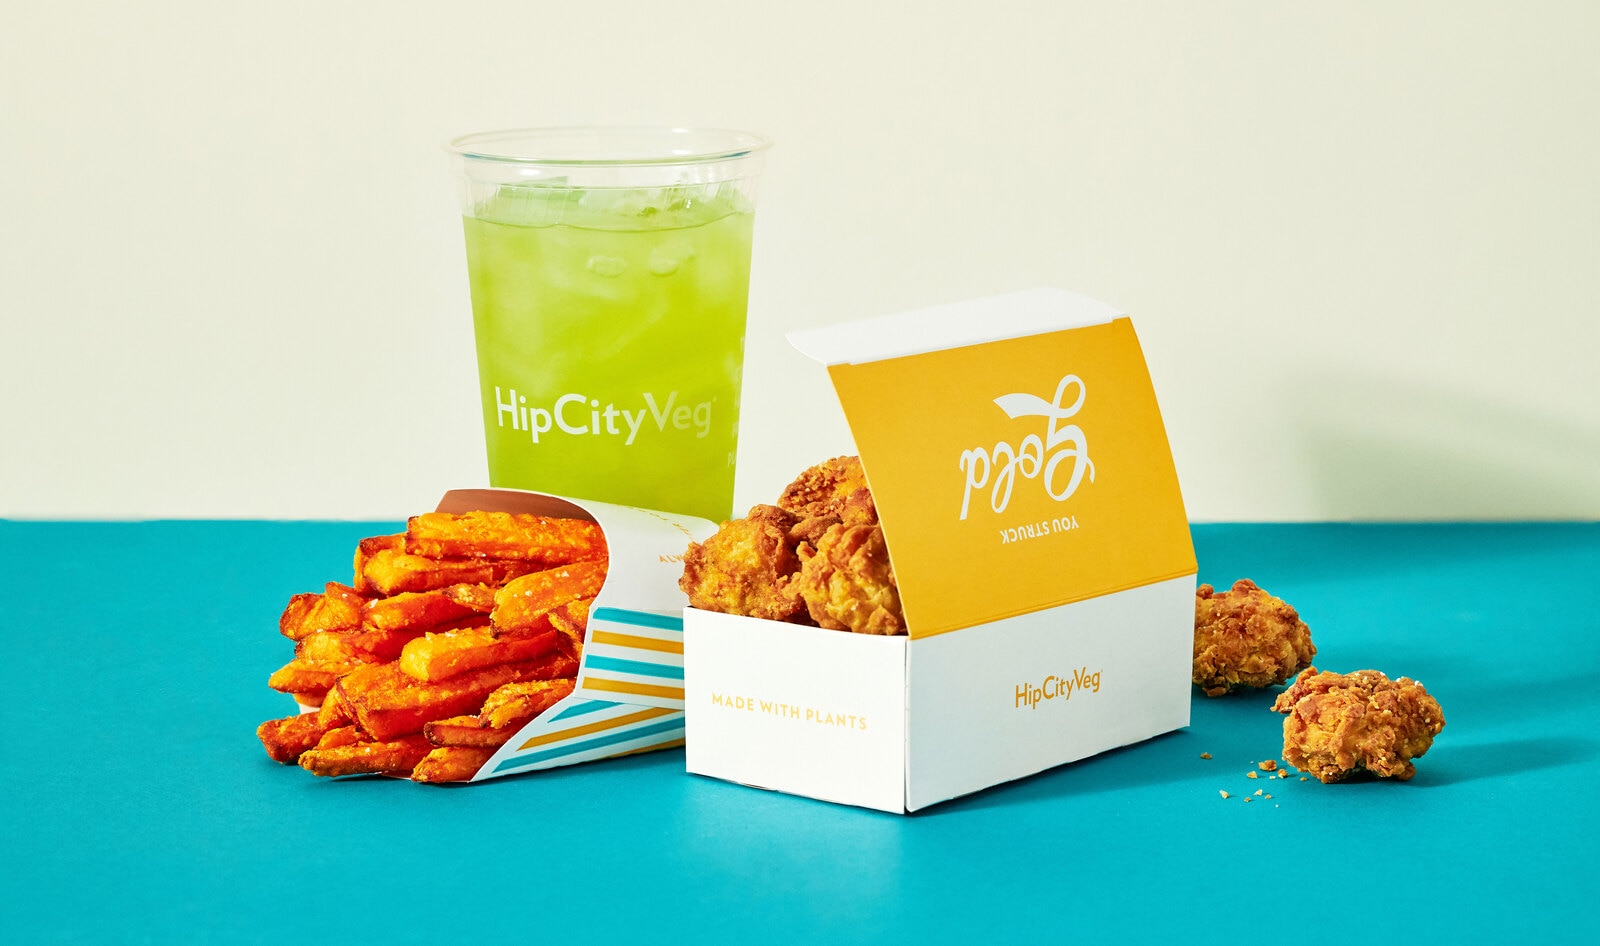 Basketball Pro Shake Milton Partners With HipCityVeg to Donate 500 Vegan Meals to Philadelphia Medical Workers